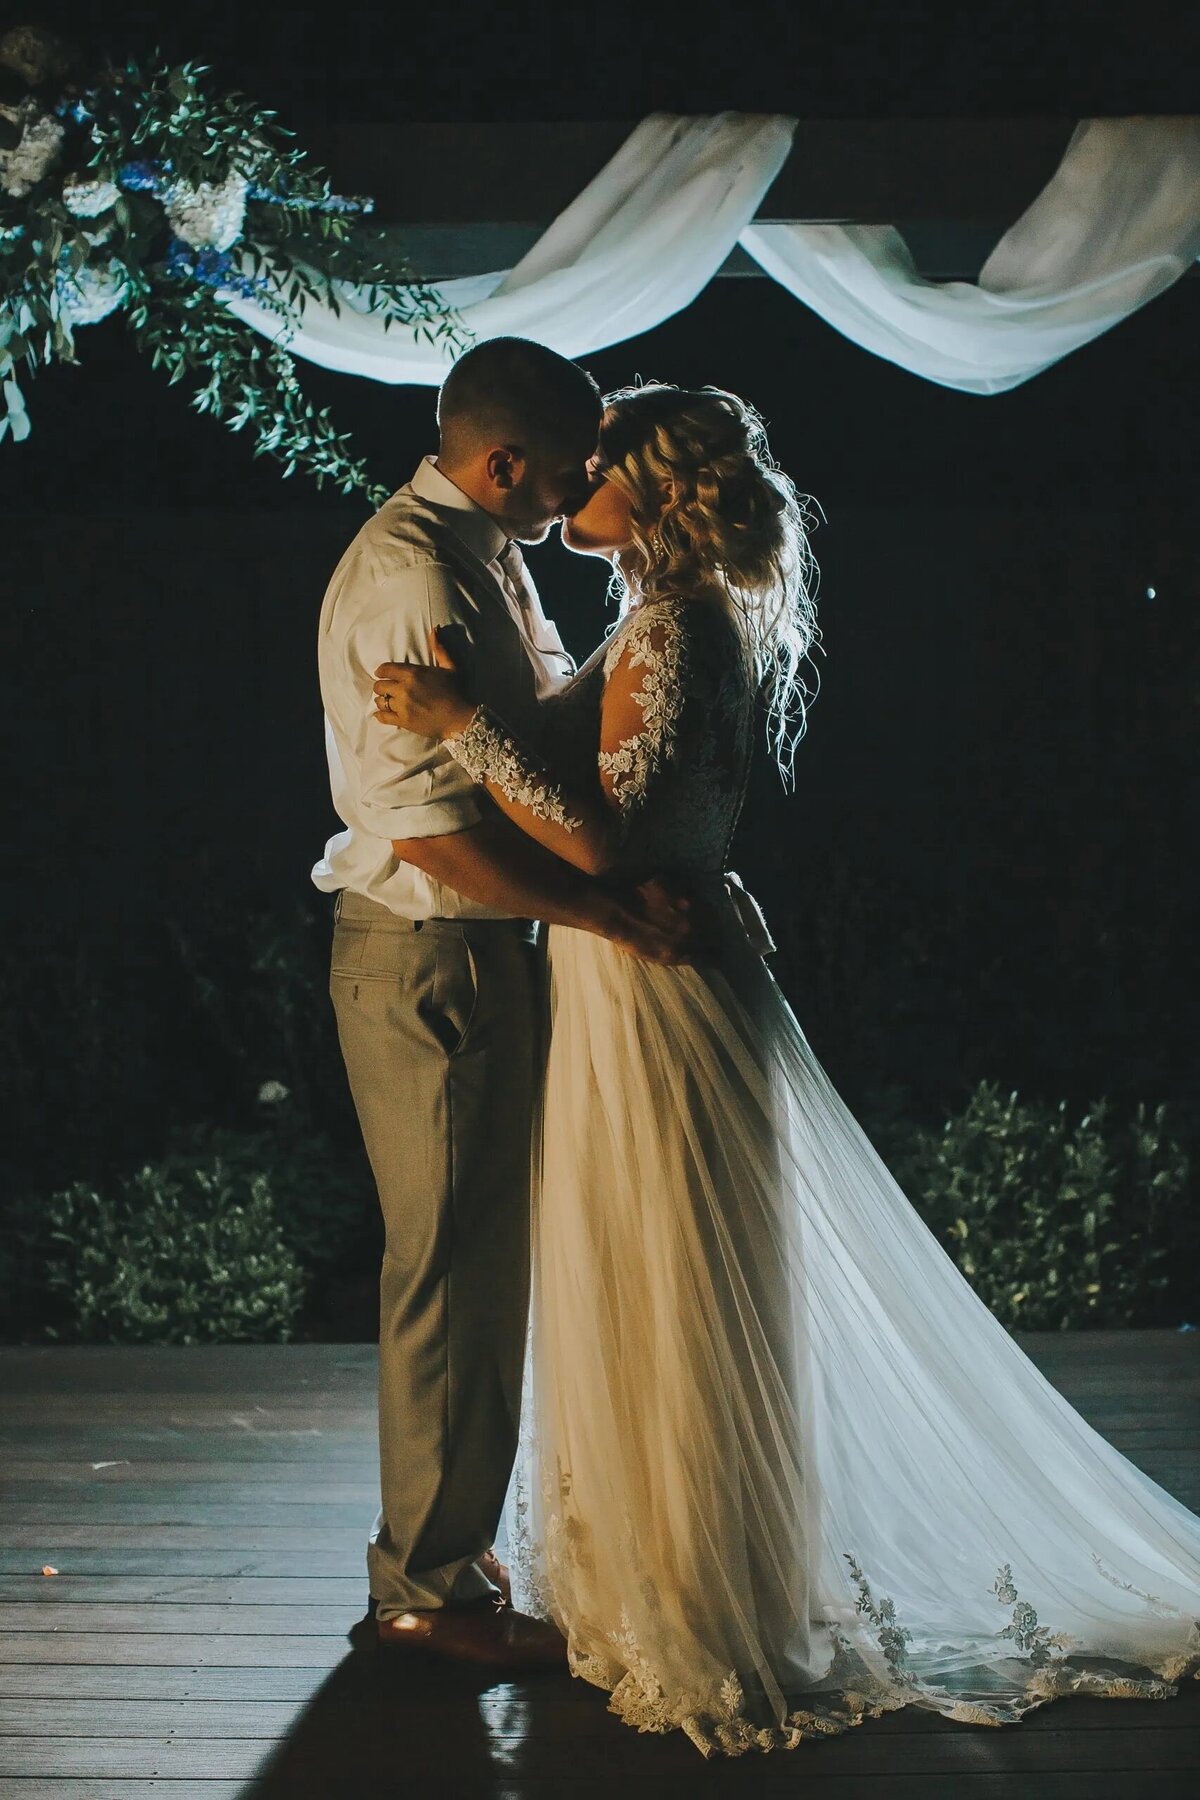 A bride and groom share an intimate dance under soft ambient lighting, with draped fabric above, in a romantic evening setting.